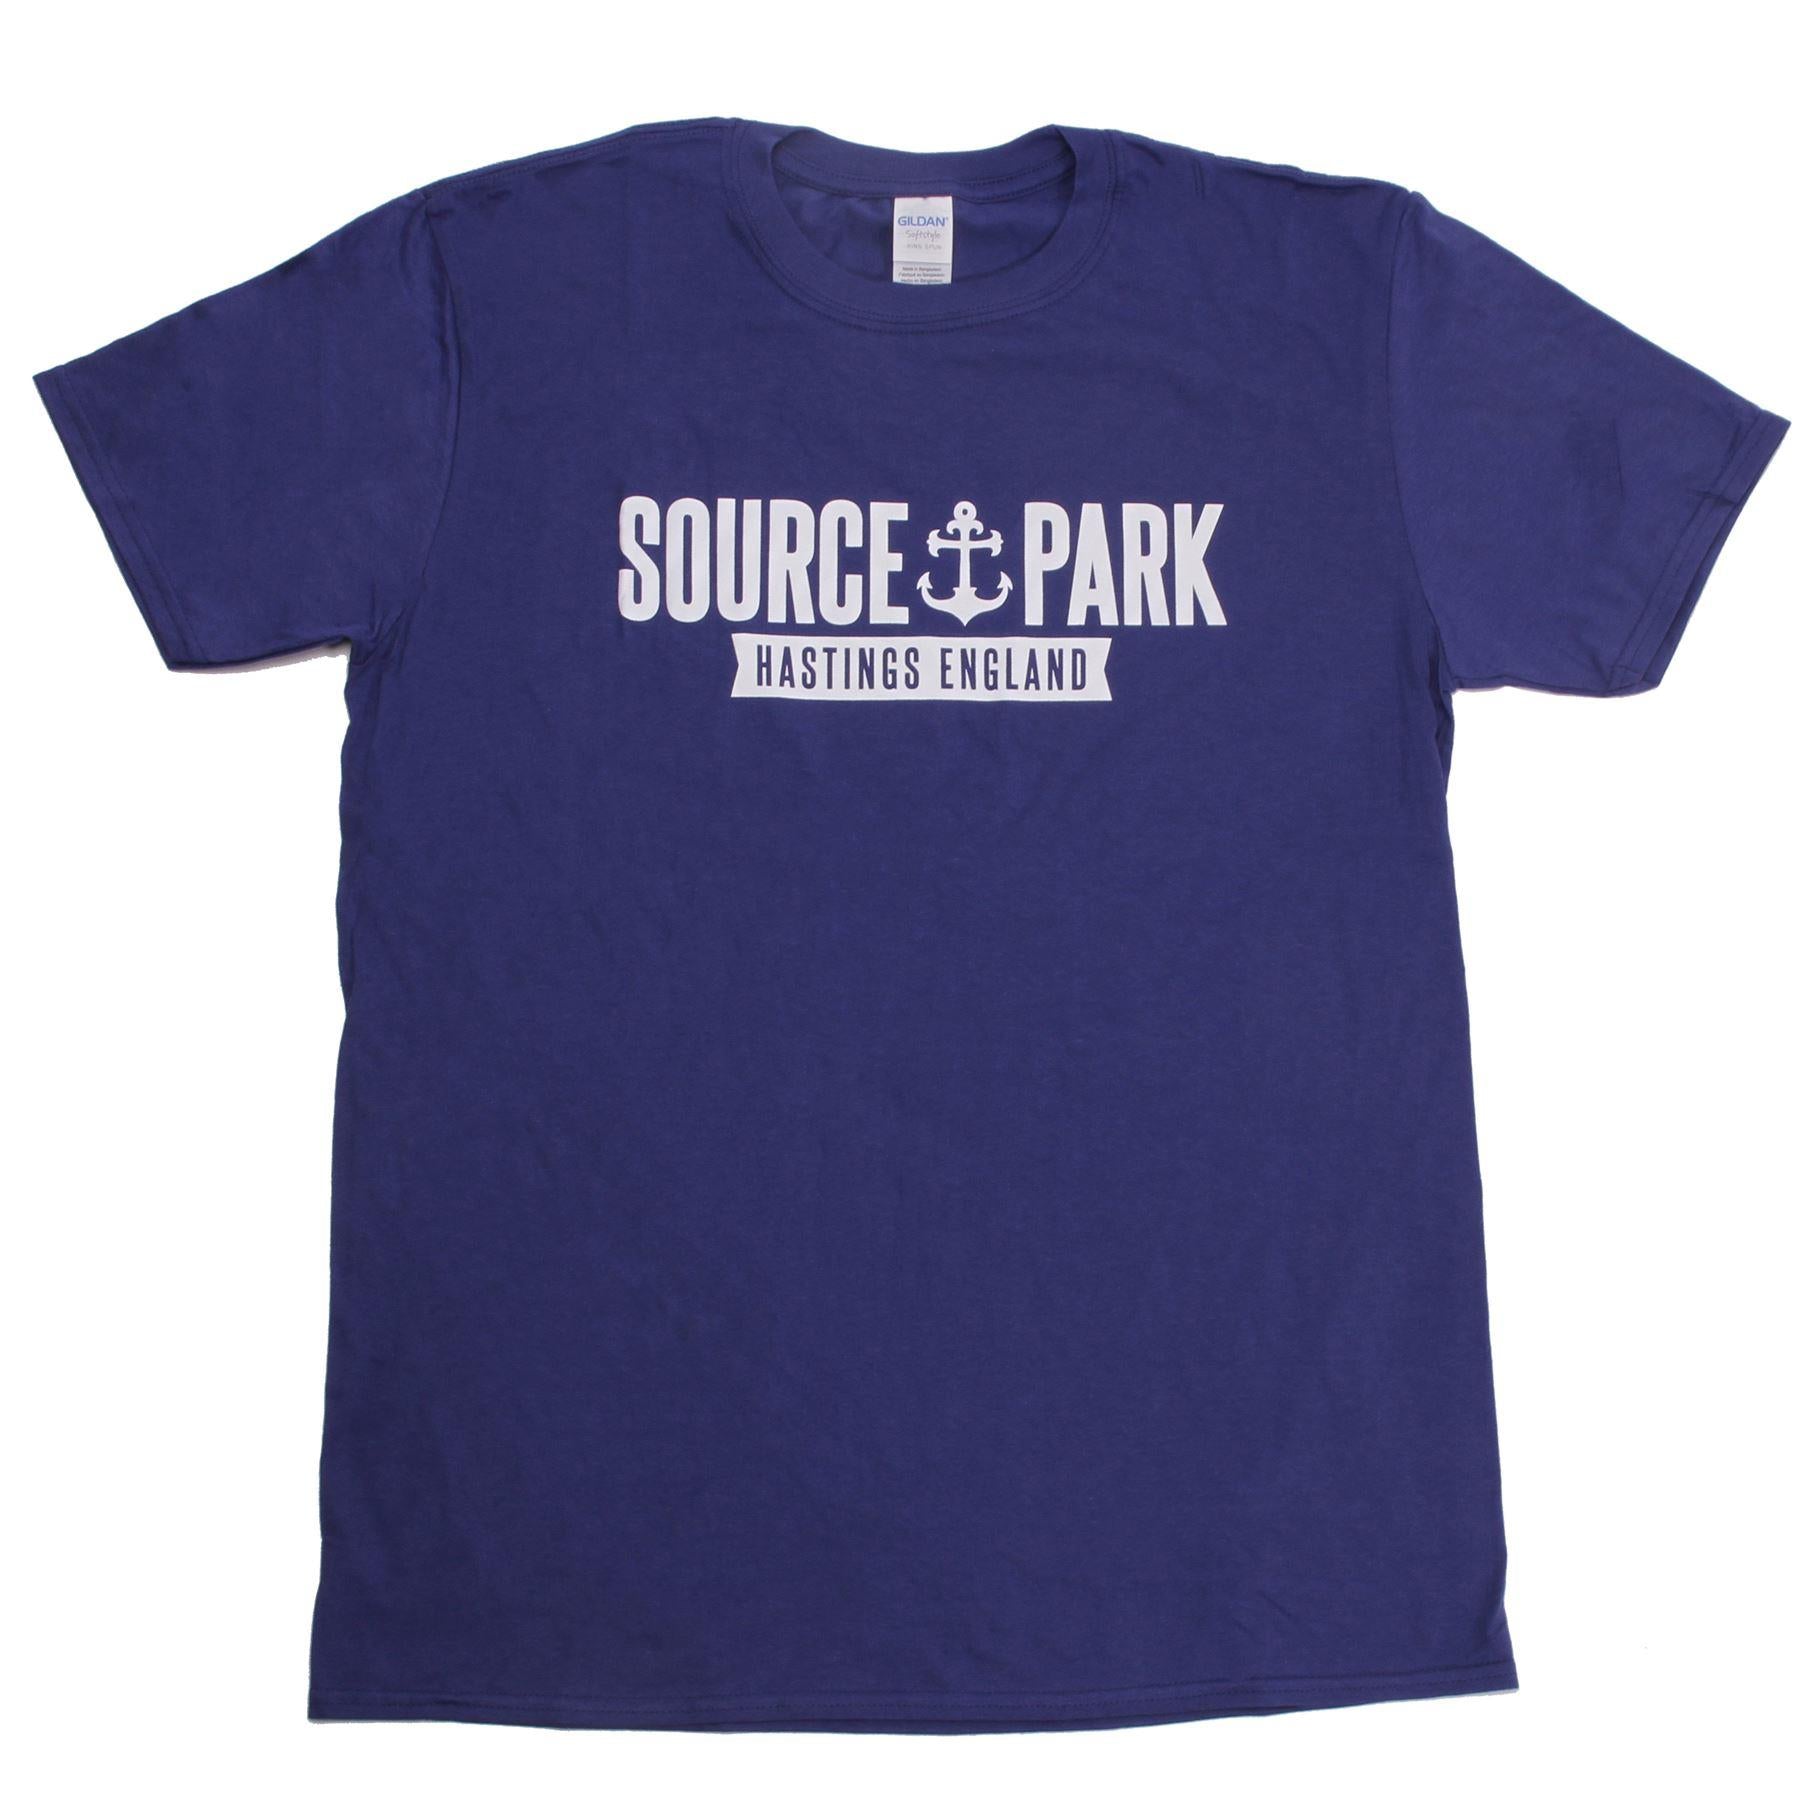 An image of Source Source Park Adults Tee Blue / XXL T-shirts